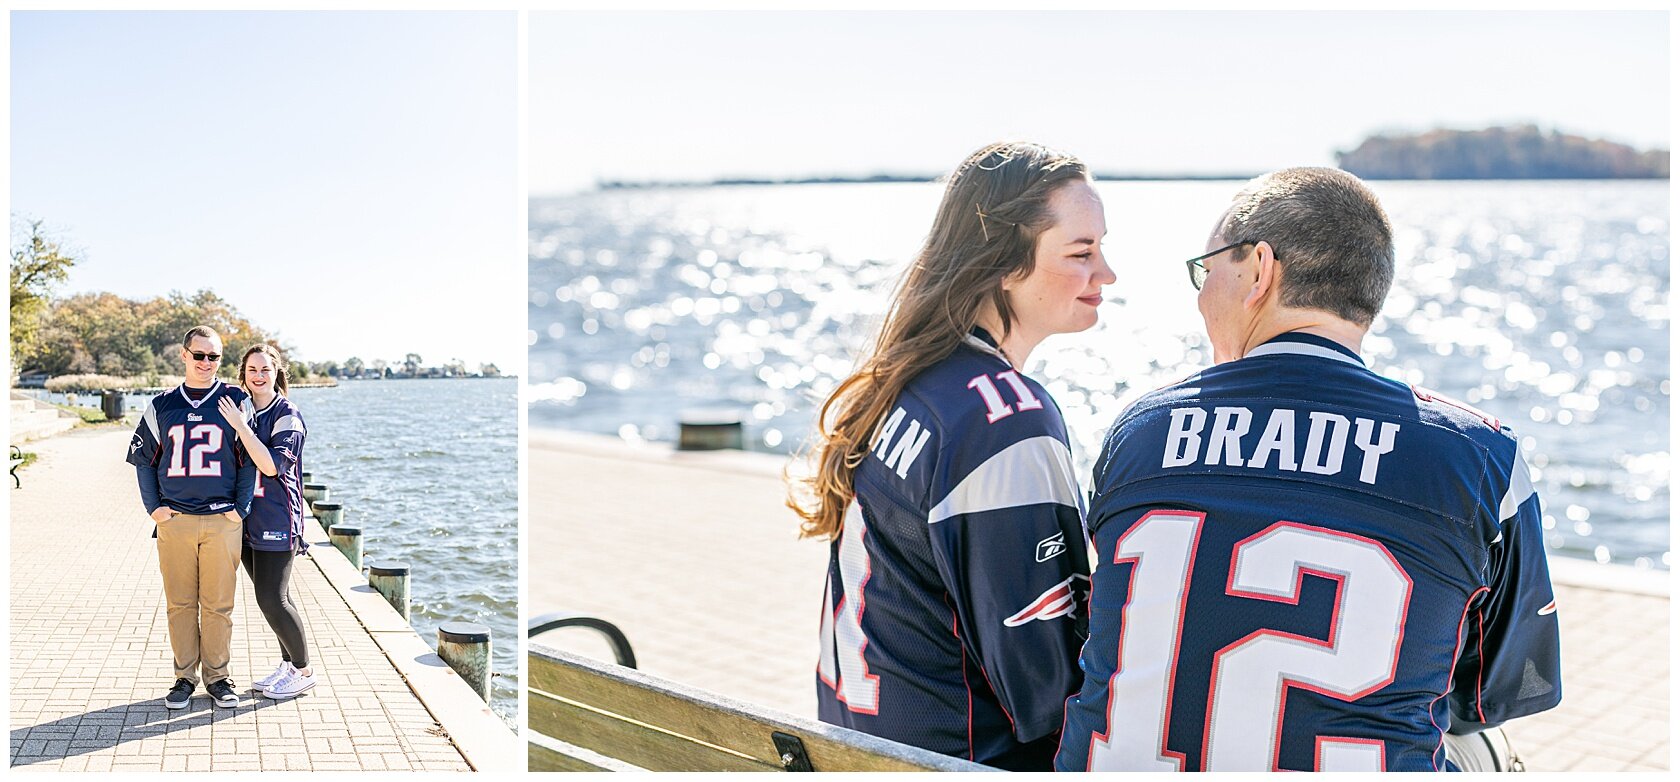 Clare Zach Quiet Waters Park Annapolis Engagement Session November 2019 Living Radiant Photography_0028.jpg